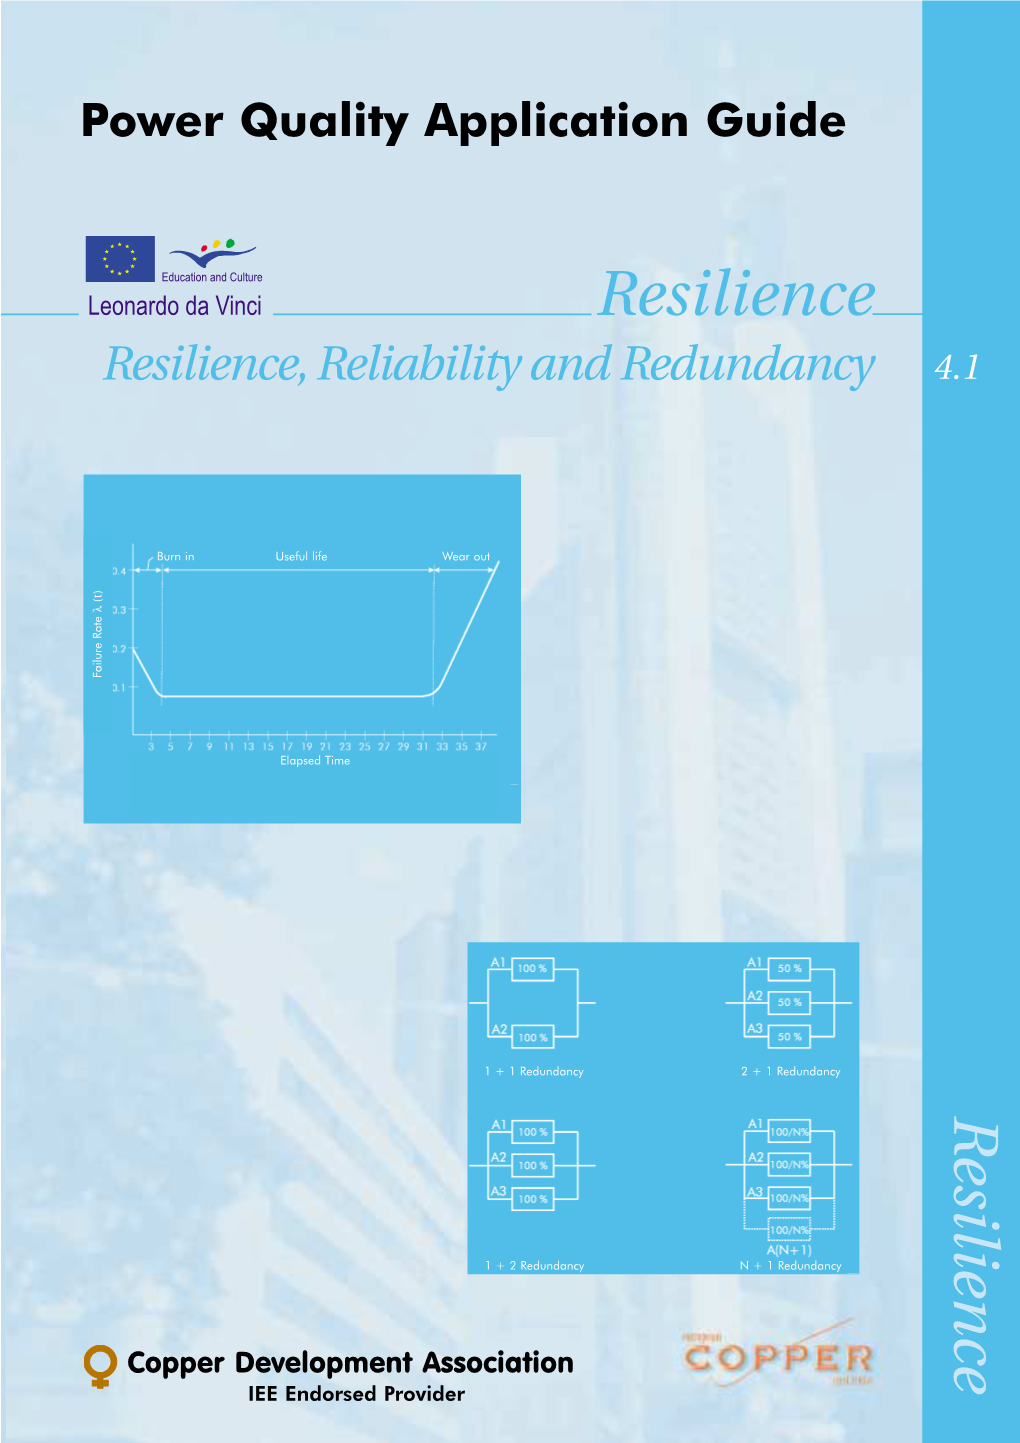 4.1 Resilience, Reliability and Redundancy